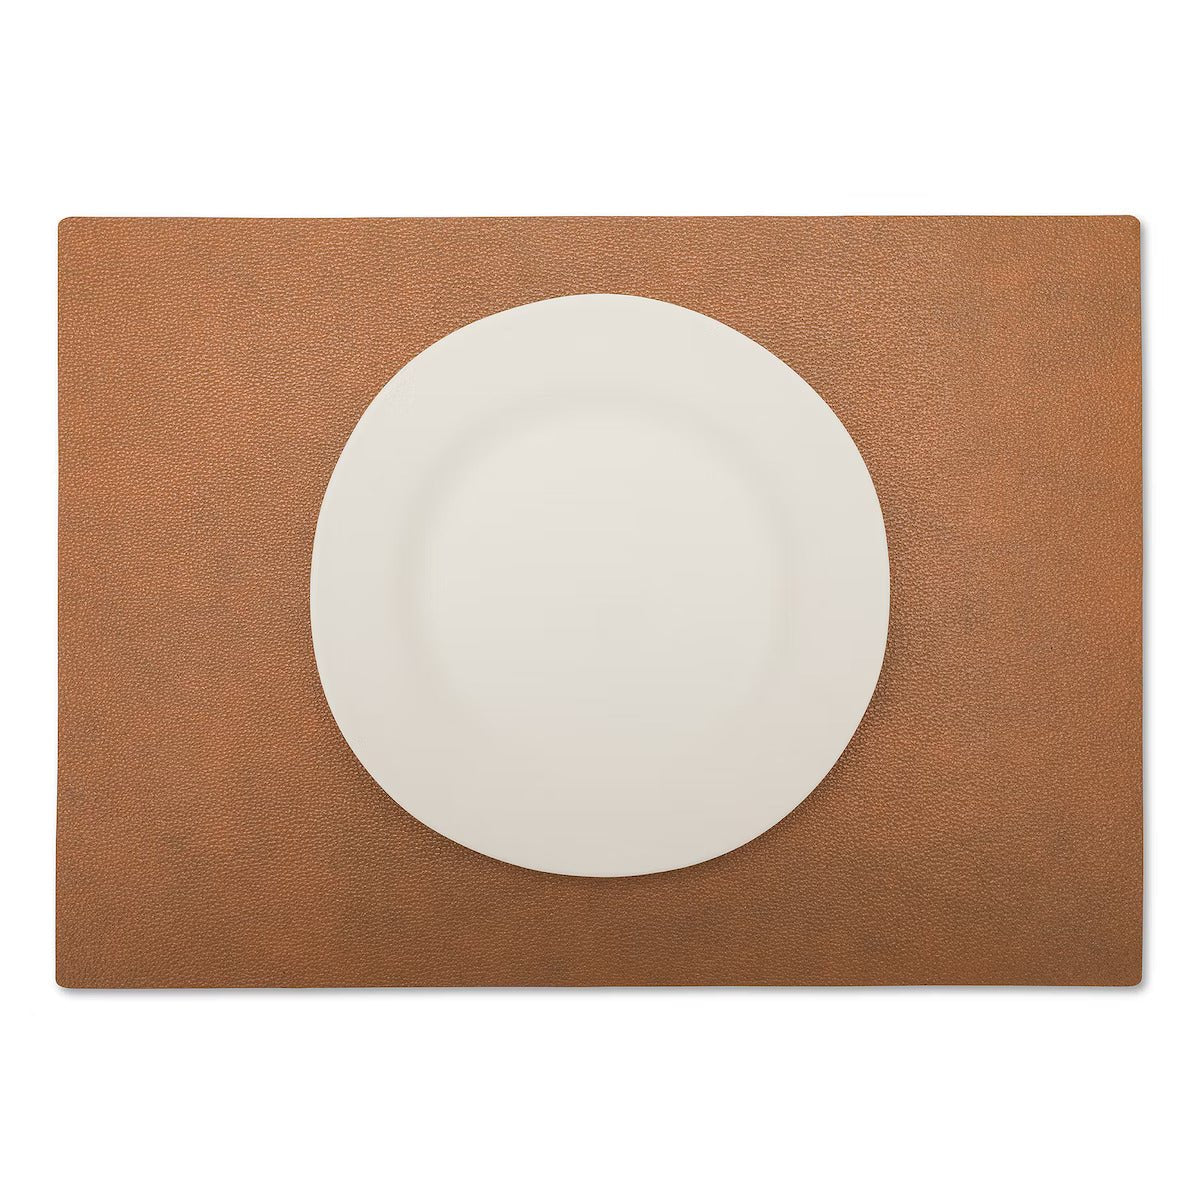 A large rectangular textured washable paper placemat in tan is shown under a white plate.